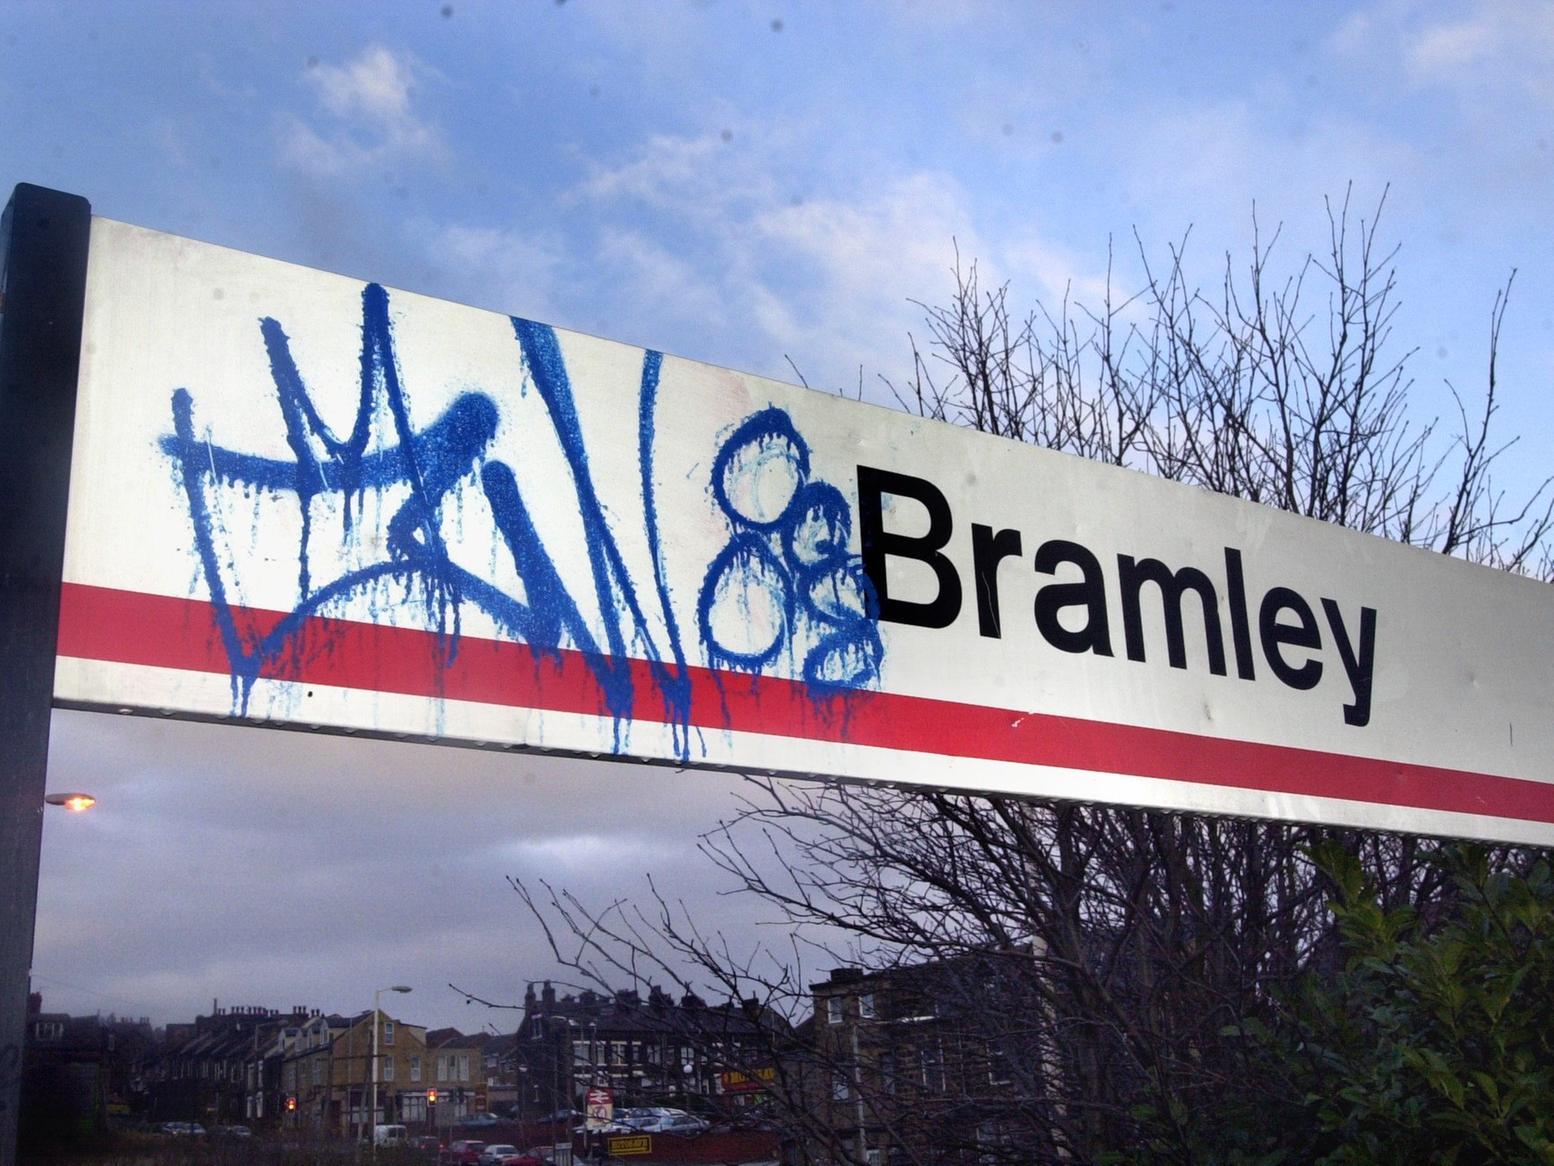 32 reports of anti-social behaviour in Bramley and the surrounding area in December 2019